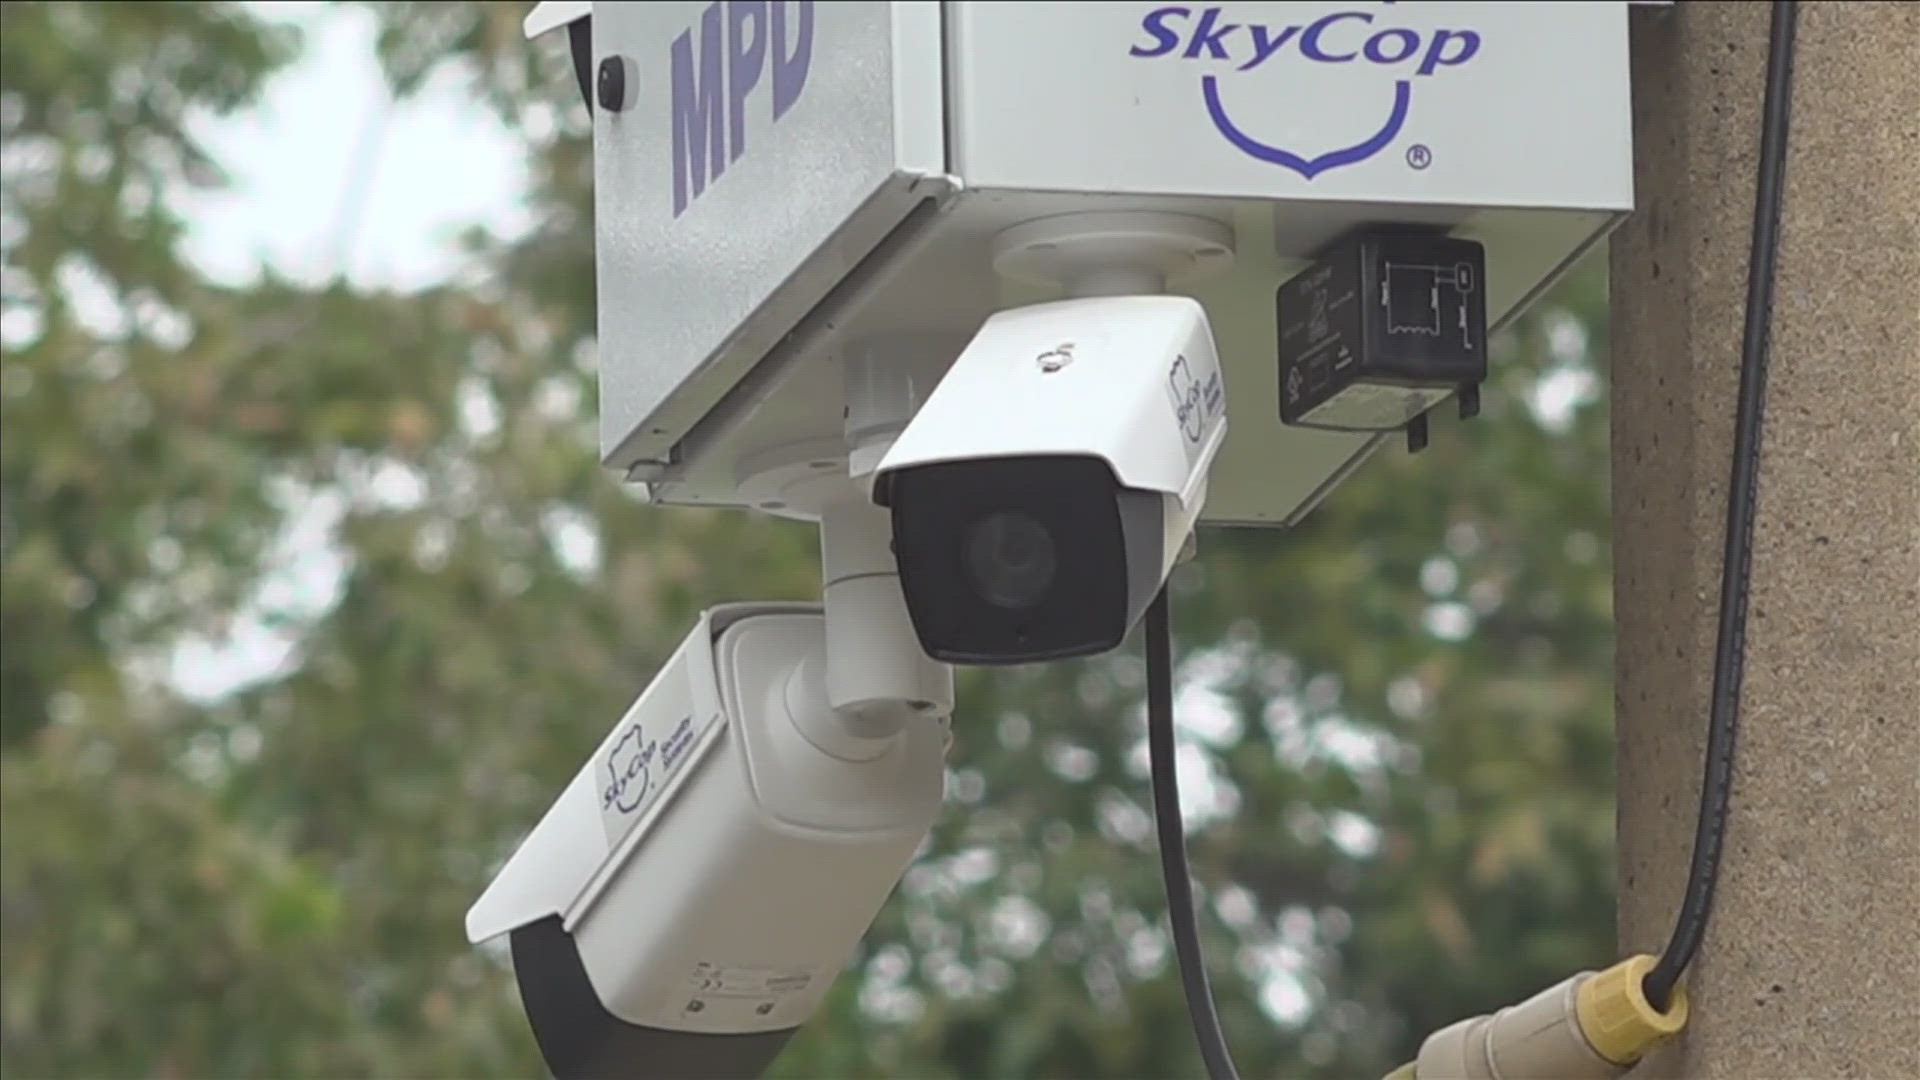 Memphis residents in the Whitehaven neighborhood can expect two dozen new SkyCop cameras in their area. Some approve of the idea, while others remain skeptical.